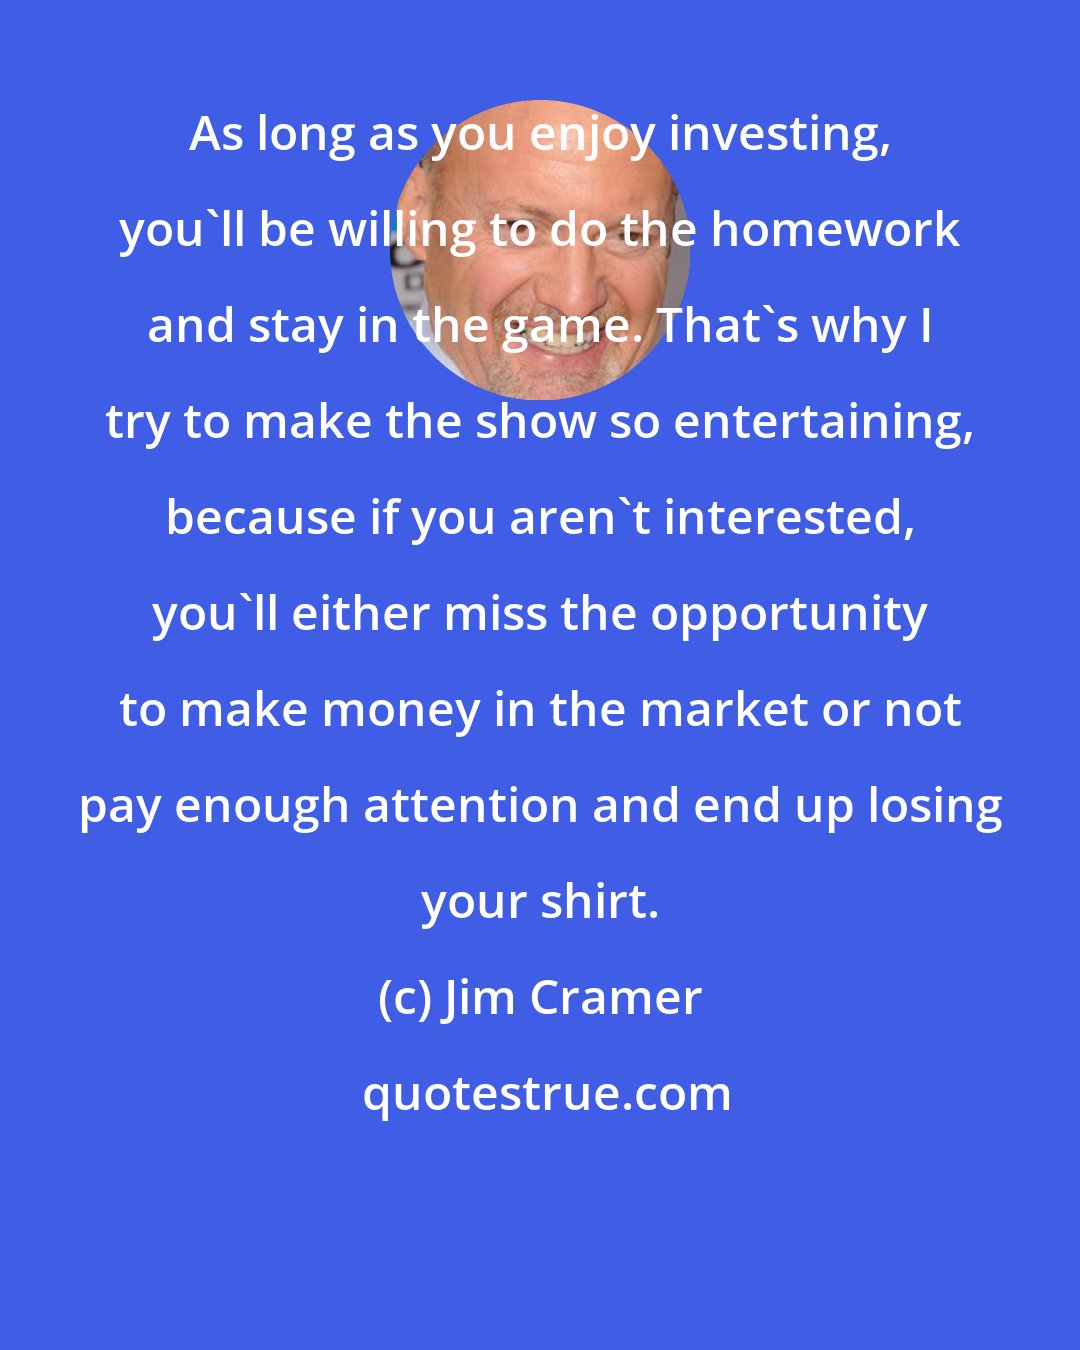 Jim Cramer: As long as you enjoy investing, you'll be willing to do the homework and stay in the game. That's why I try to make the show so entertaining, because if you aren't interested, you'll either miss the opportunity to make money in the market or not pay enough attention and end up losing your shirt.